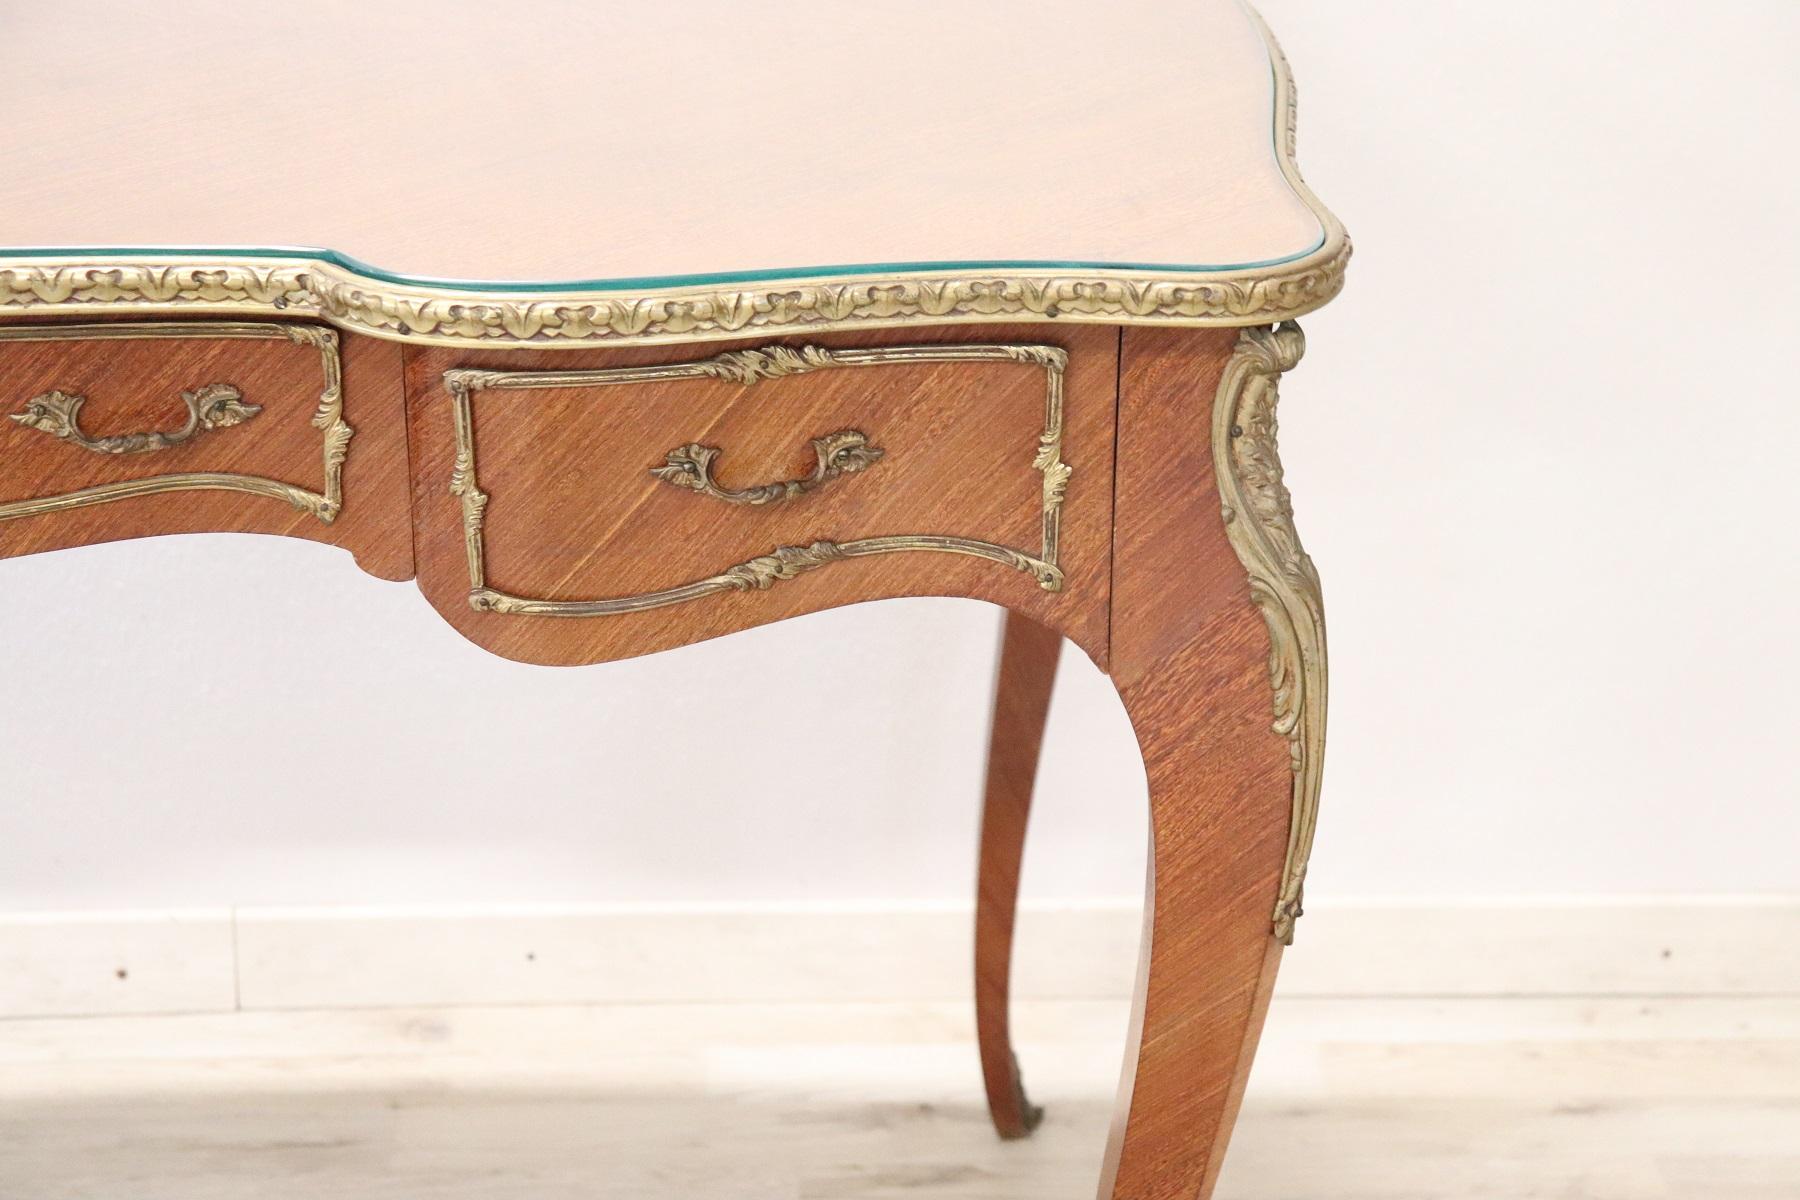 Louis XV style furniture richly adorned with gilded and chiselled bronze.
Desk finished inlaid centre in rosewood with a wooden floor of good measure protected by glass for a practical use. Desk can also be used for professional use with three